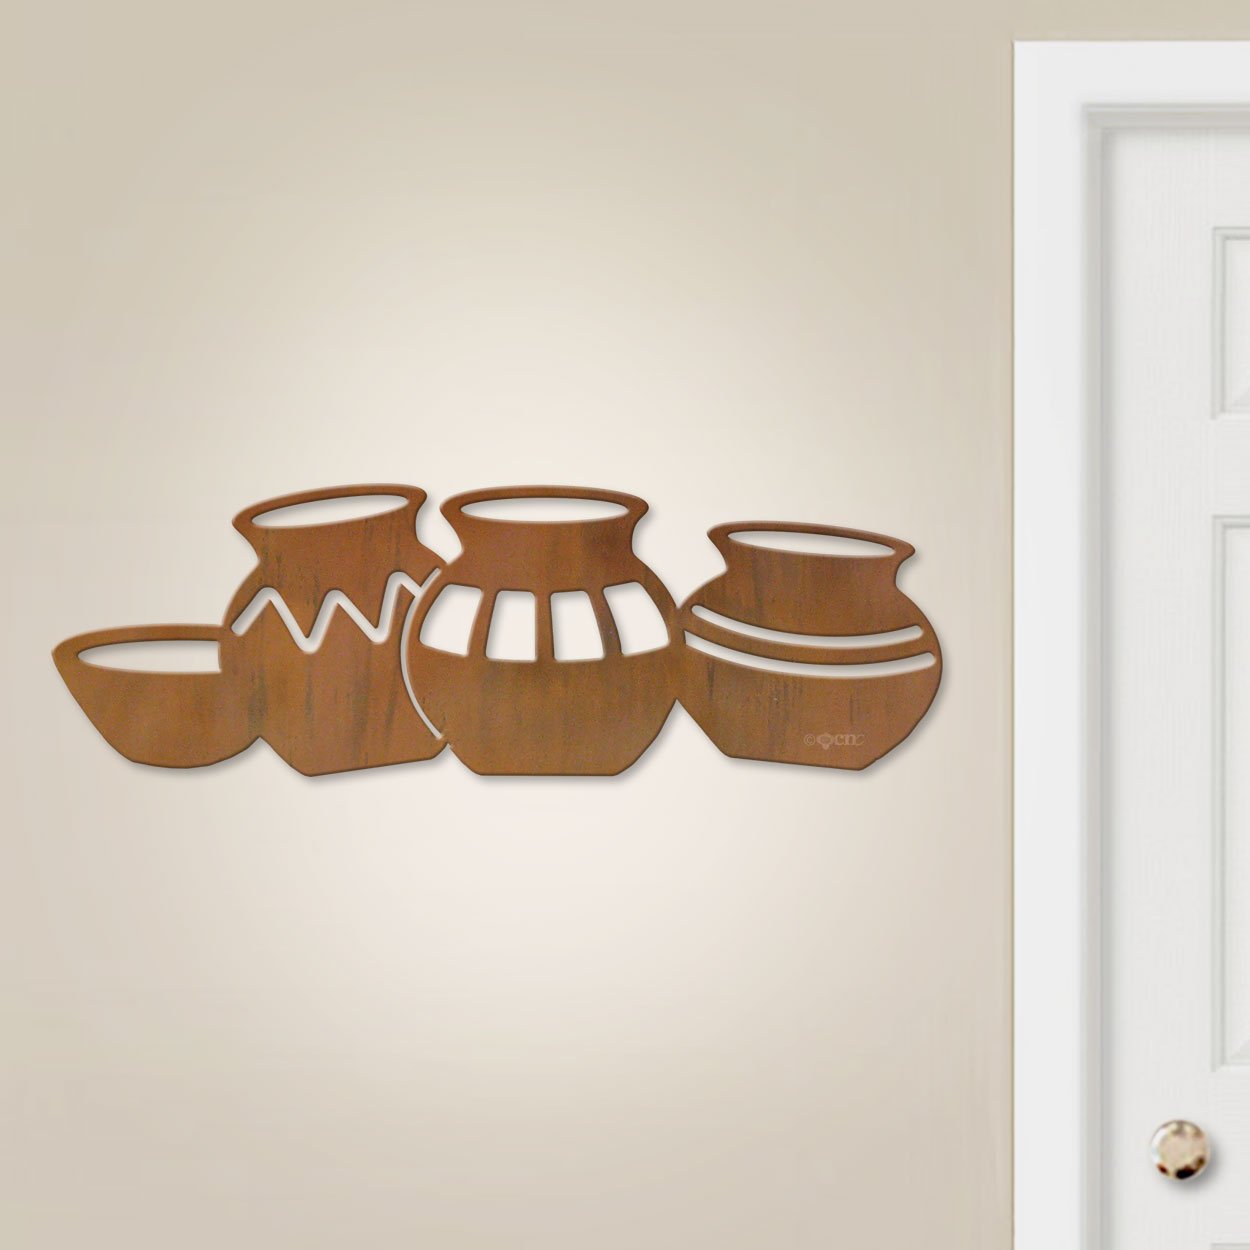 601003 - 36in Four Pots Large Metal Wall Art